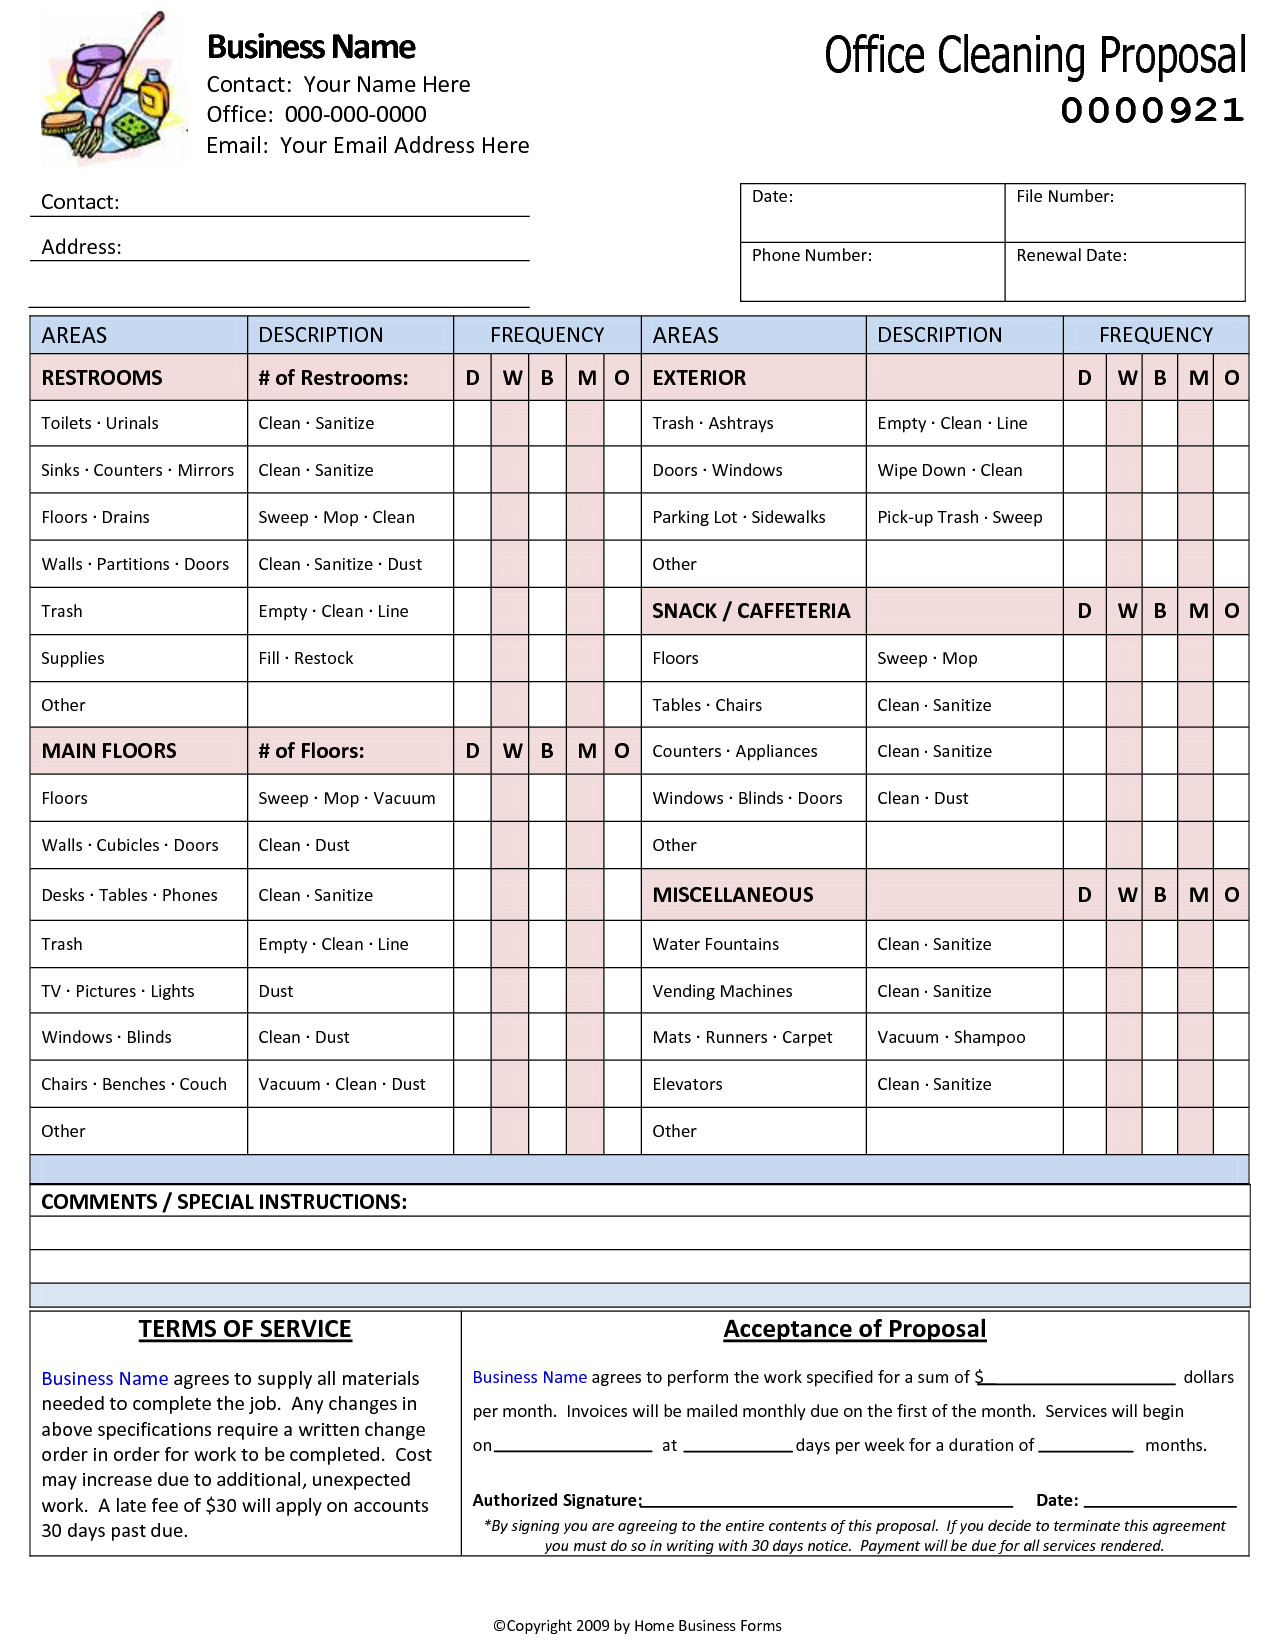 Moving Checklist Excel Spreadsheet Within Business Moving Checklist Template Valid Moving Checklist Excel